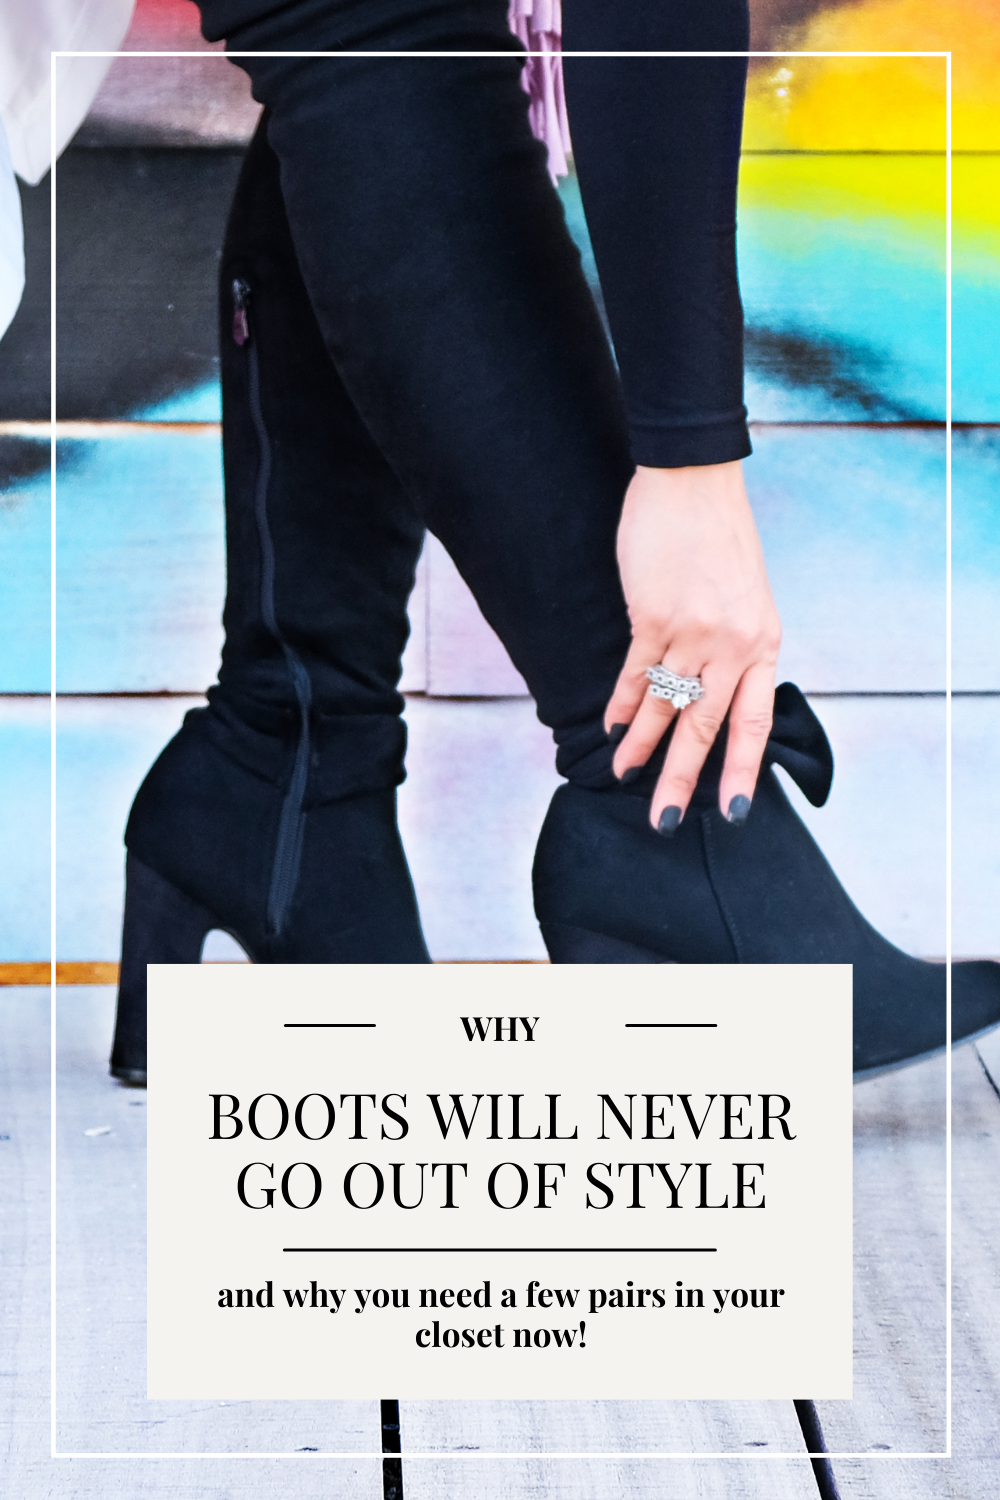 Why Boots Will Never Go Out of Style